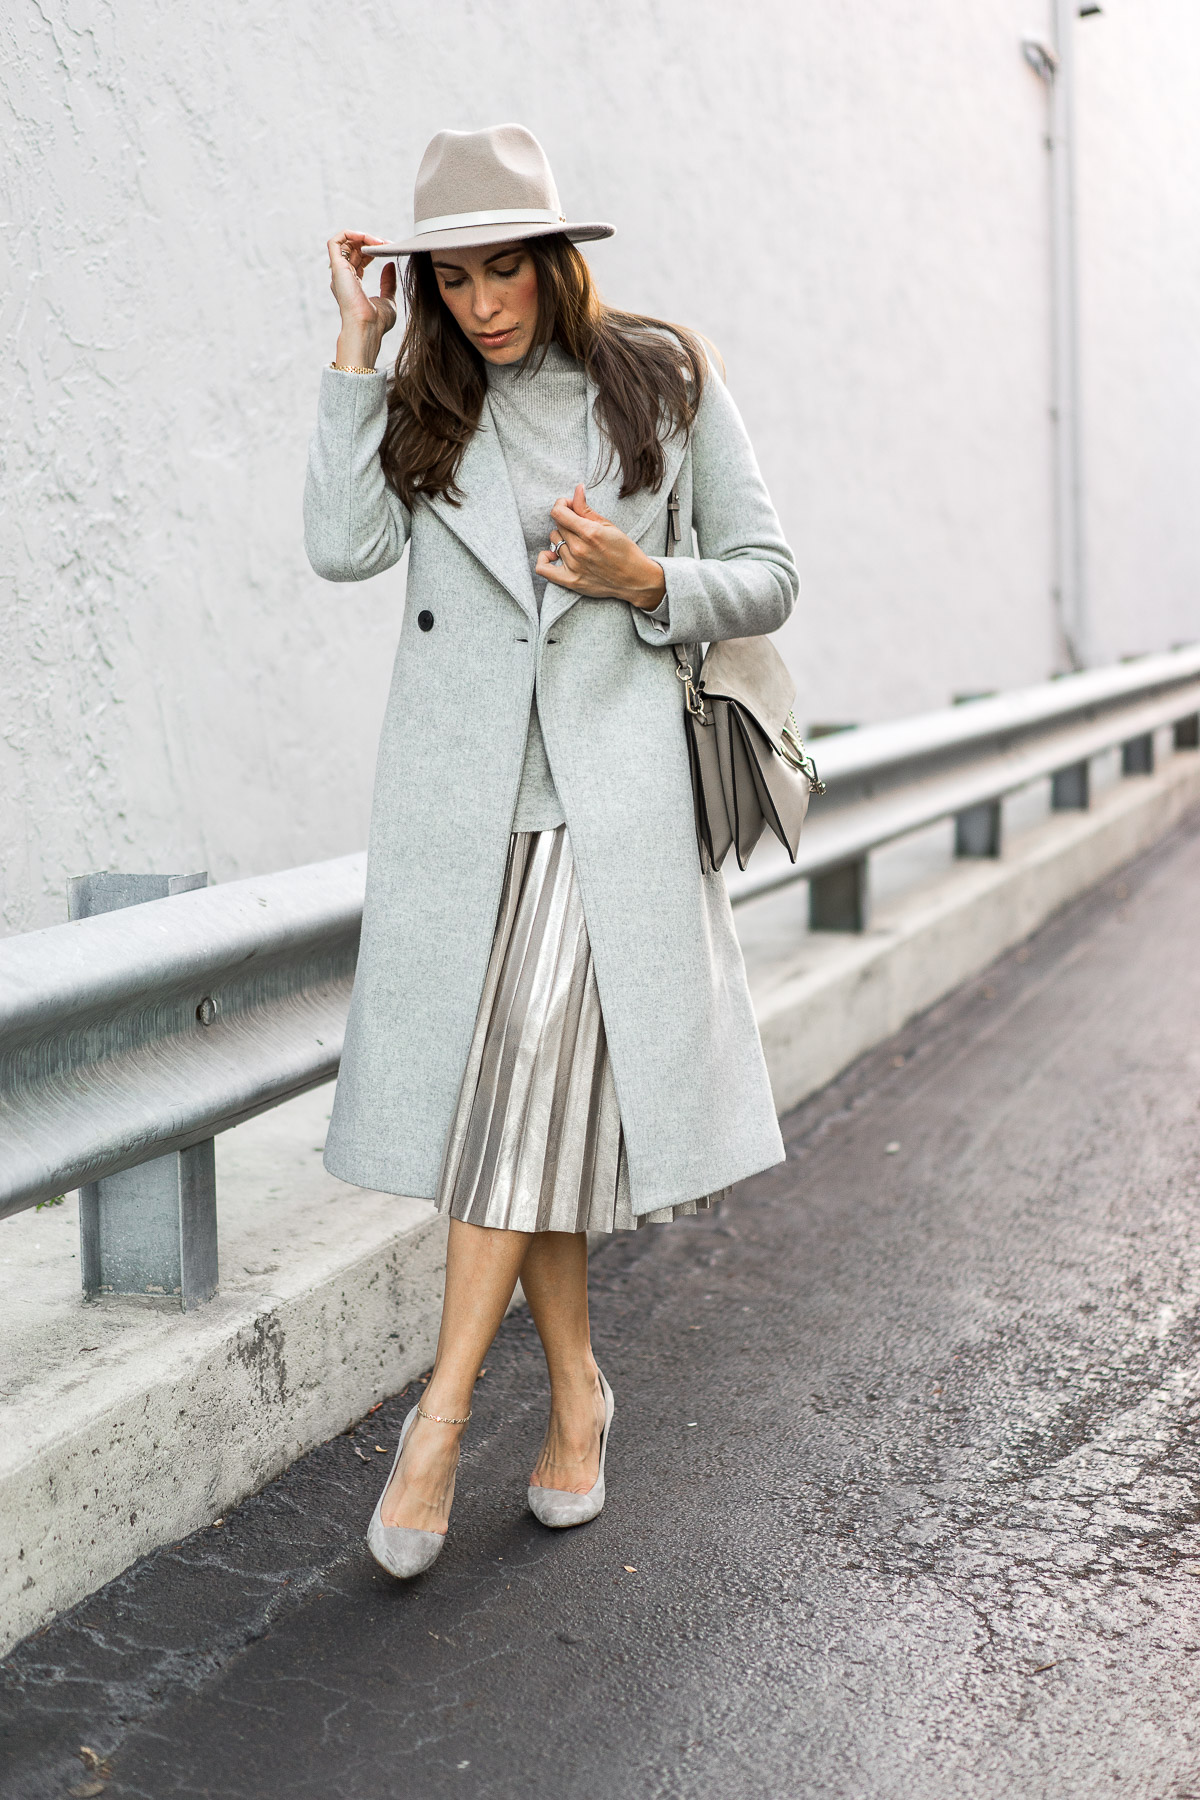 Blogger A Glam Lifestyle showcases her winter style in Club Monaco Daylina coat with gold metallic midi skirt and grey suede Madewell pumps